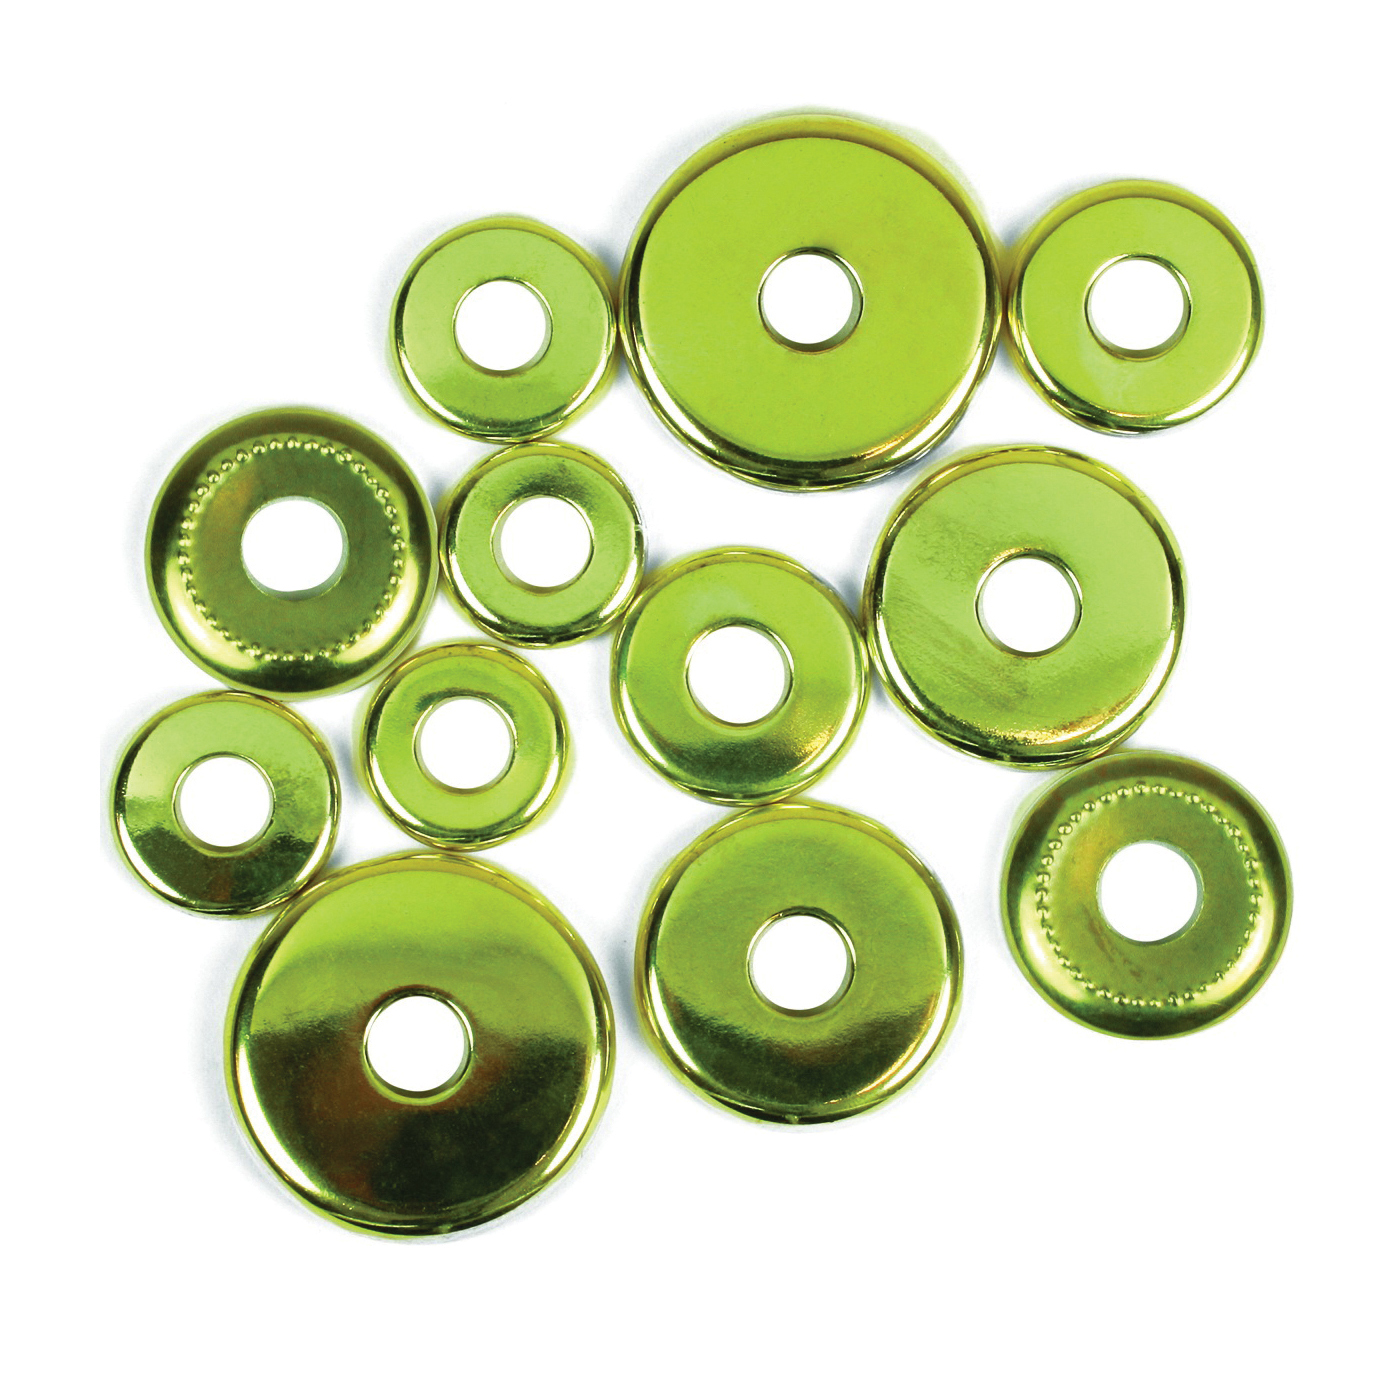 60140 Lamp Check Ring Assortment, Brass, For: 1/8 in IP Lamp Nipples